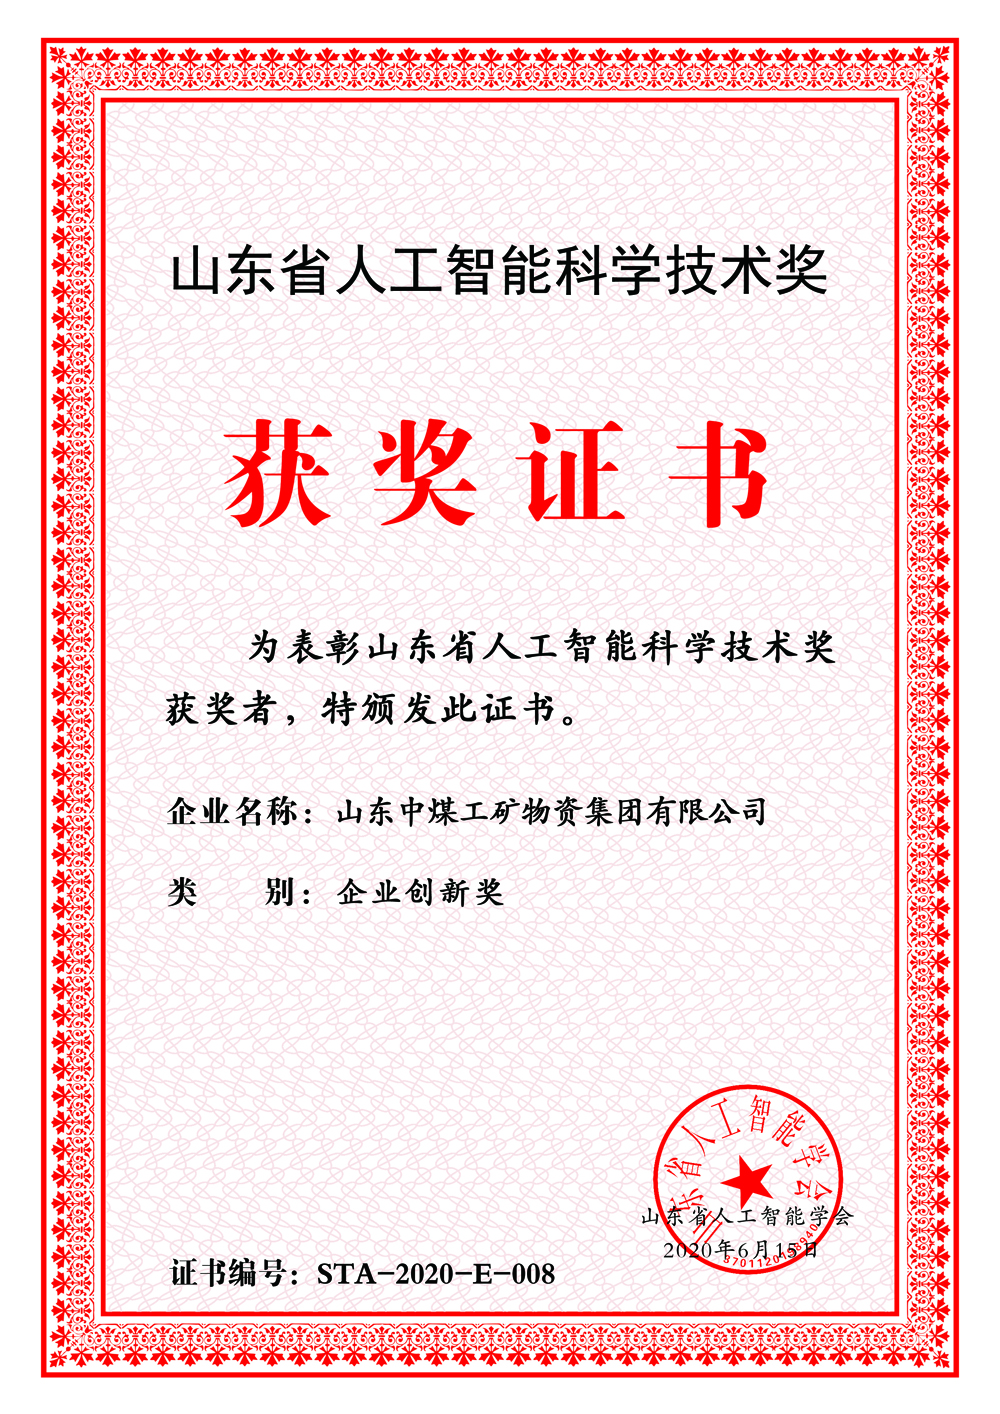 Warm Congratulations To China Coal Group For Winning The Shandong Artificial Intelligence Science And Technology Award